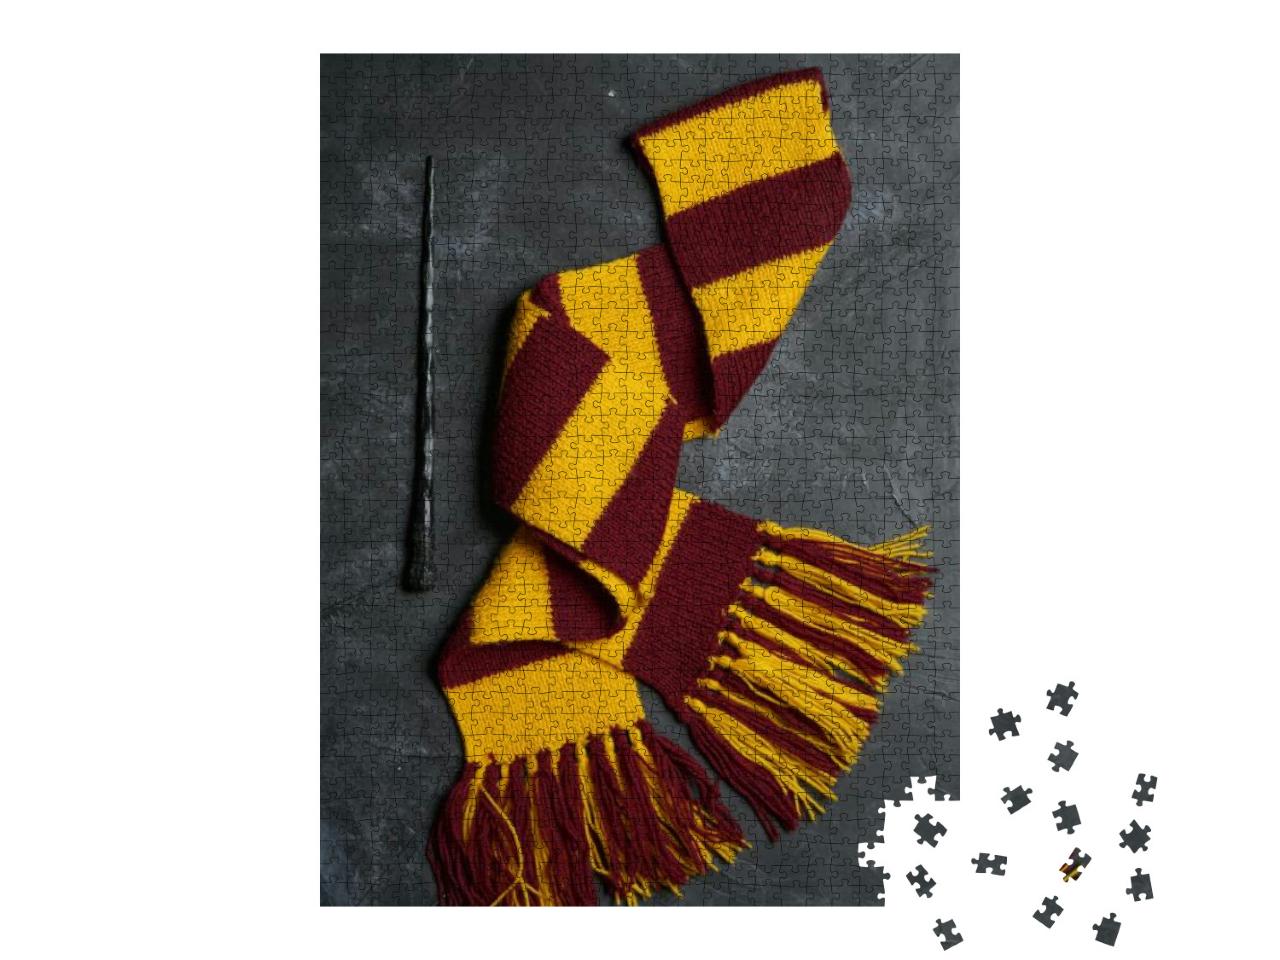 Subjects of the School of Magic. Scarf, Magic Wand... Jigsaw Puzzle with 1000 pieces